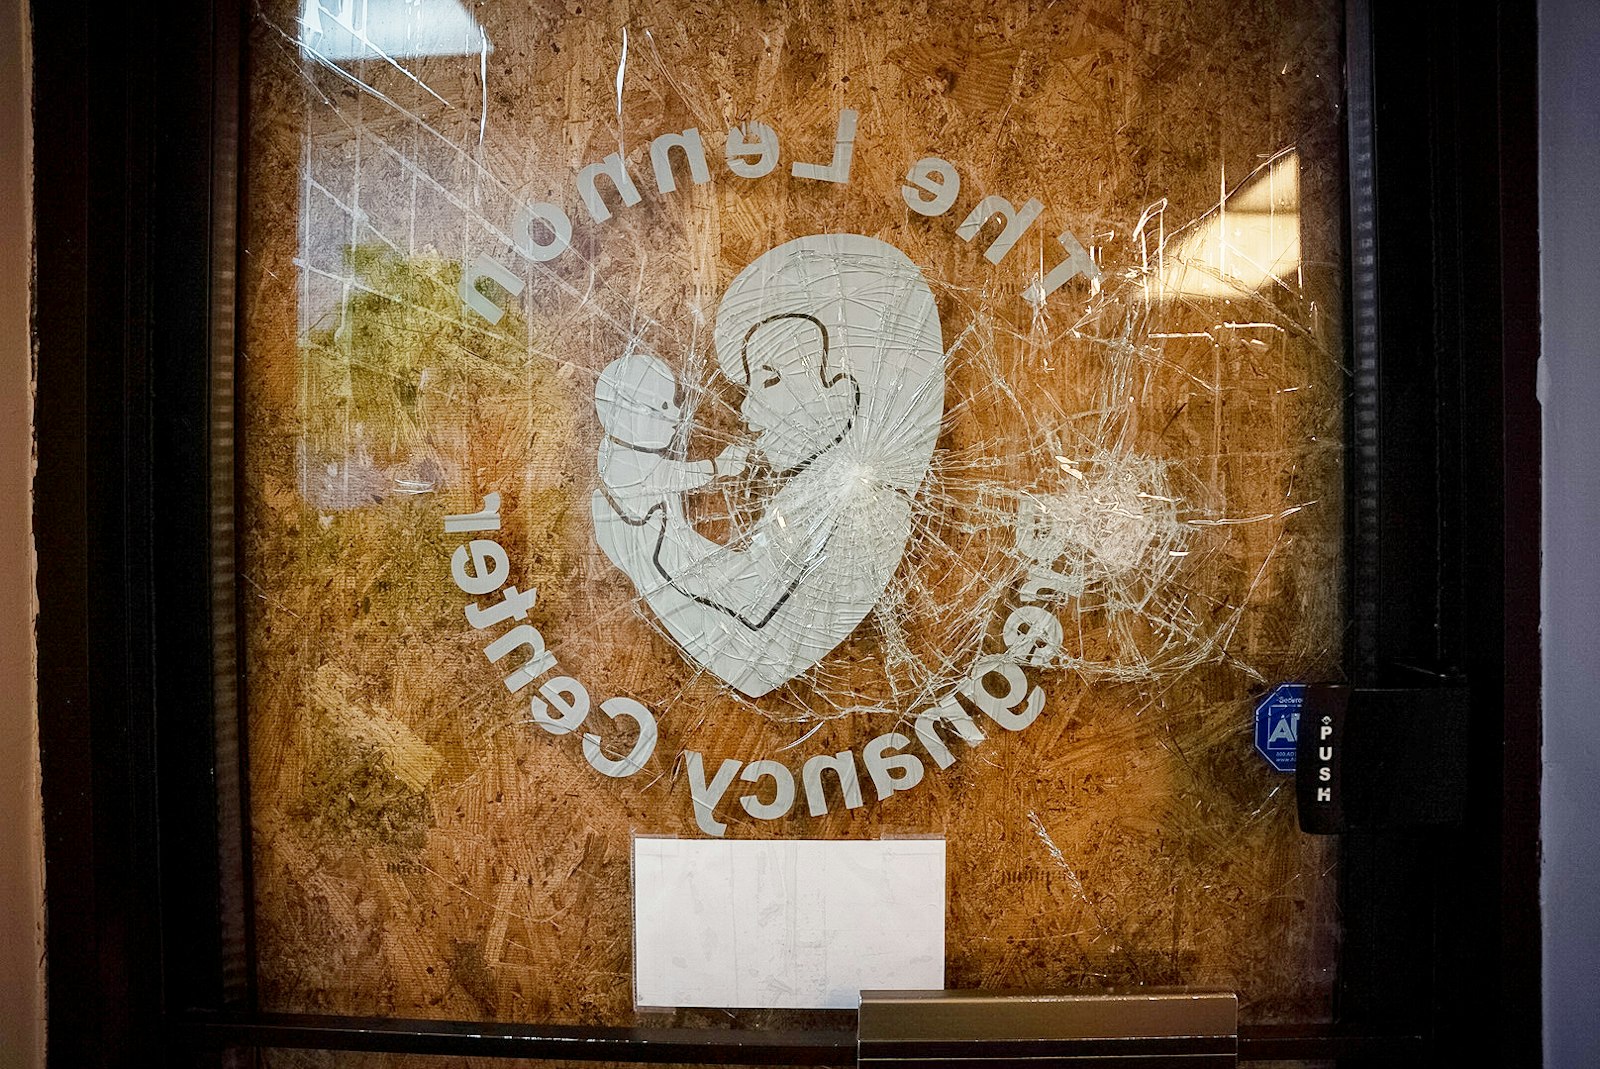 The front door of the Lennon Center remains smashed, but that hasn't deterred the work of the pregnancy center's volunteers, who continue to provide vital services for vulrenable women and babies in the community.